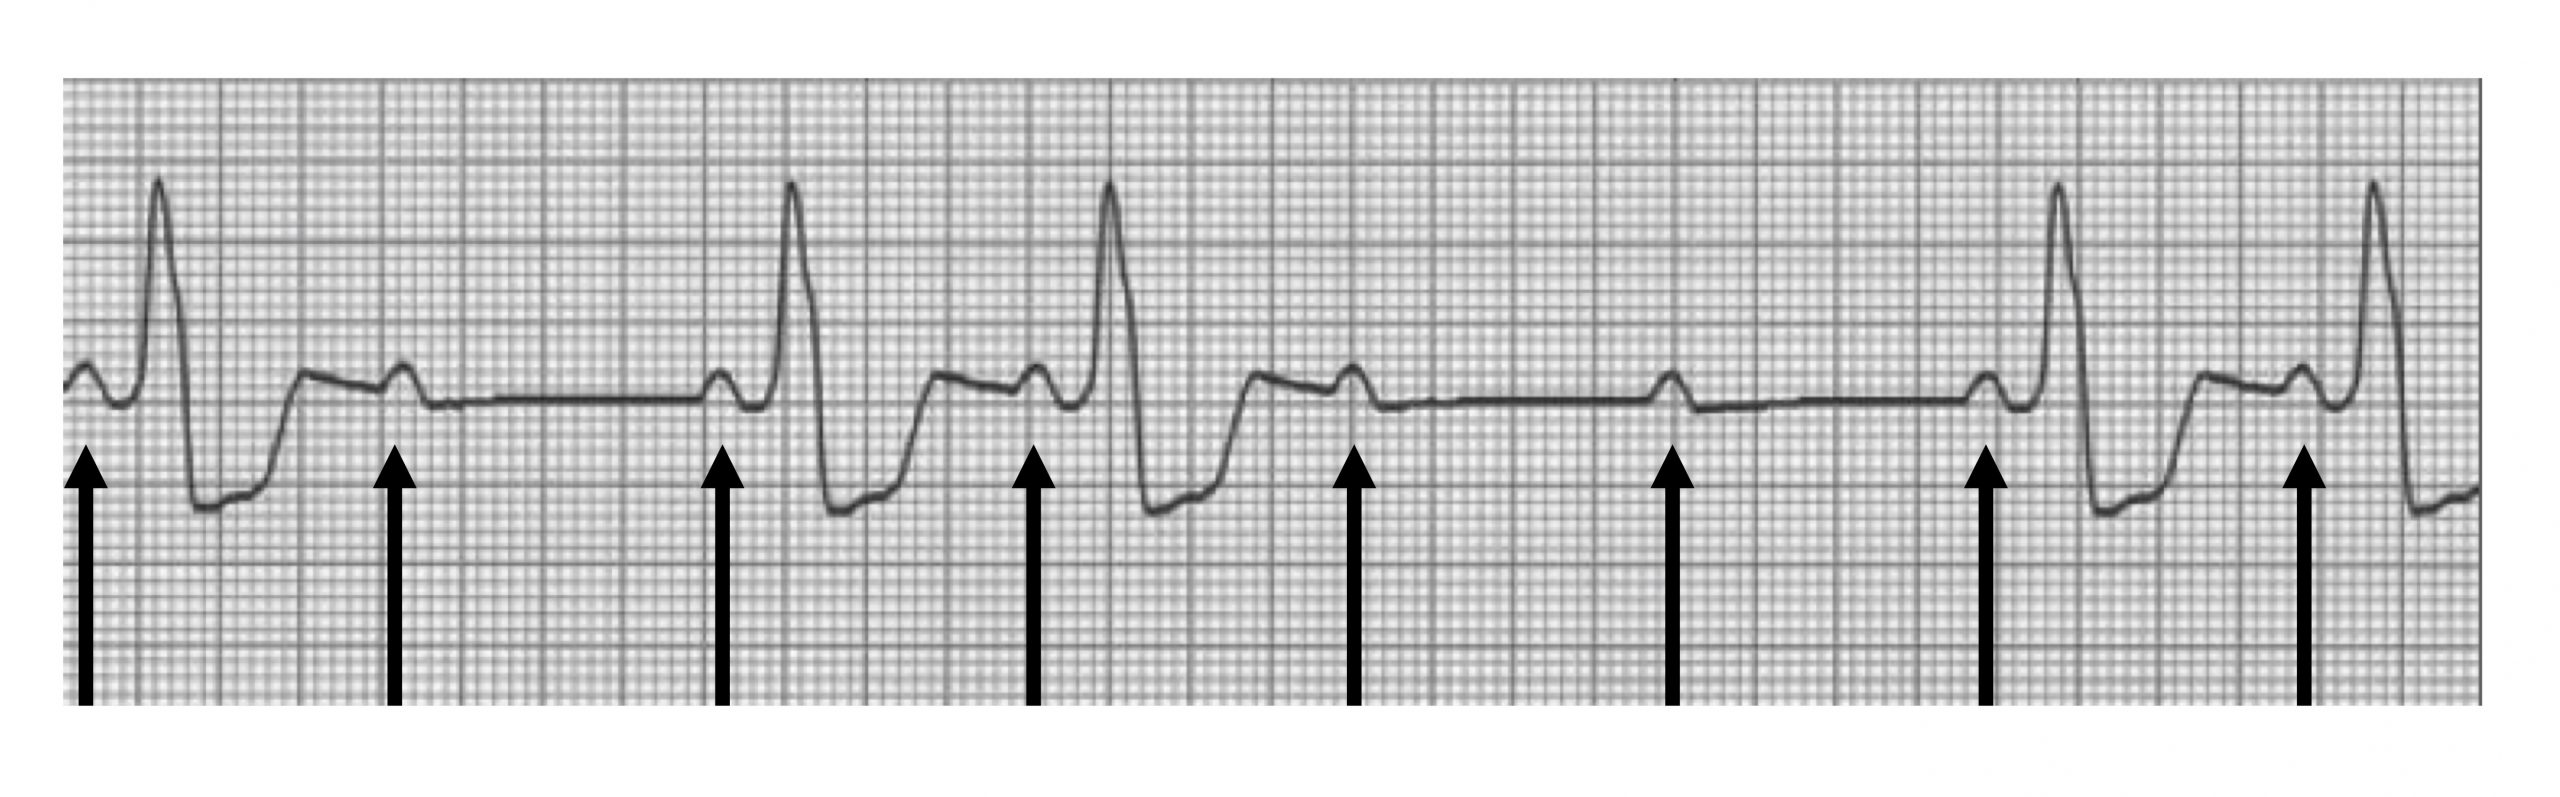 ECG shows P-waves occurring regularly but some are not followed by QRS complexes. The example shows a normal P-wave, QRS complex, T-wave sequence followed by a P-wave without a subsequent QRS complex or T-wave. Then two normal P-QRS-T sequences which are followed by isolated normal looking P-waves without QRS complexes. The ECG then returns to normal structure.